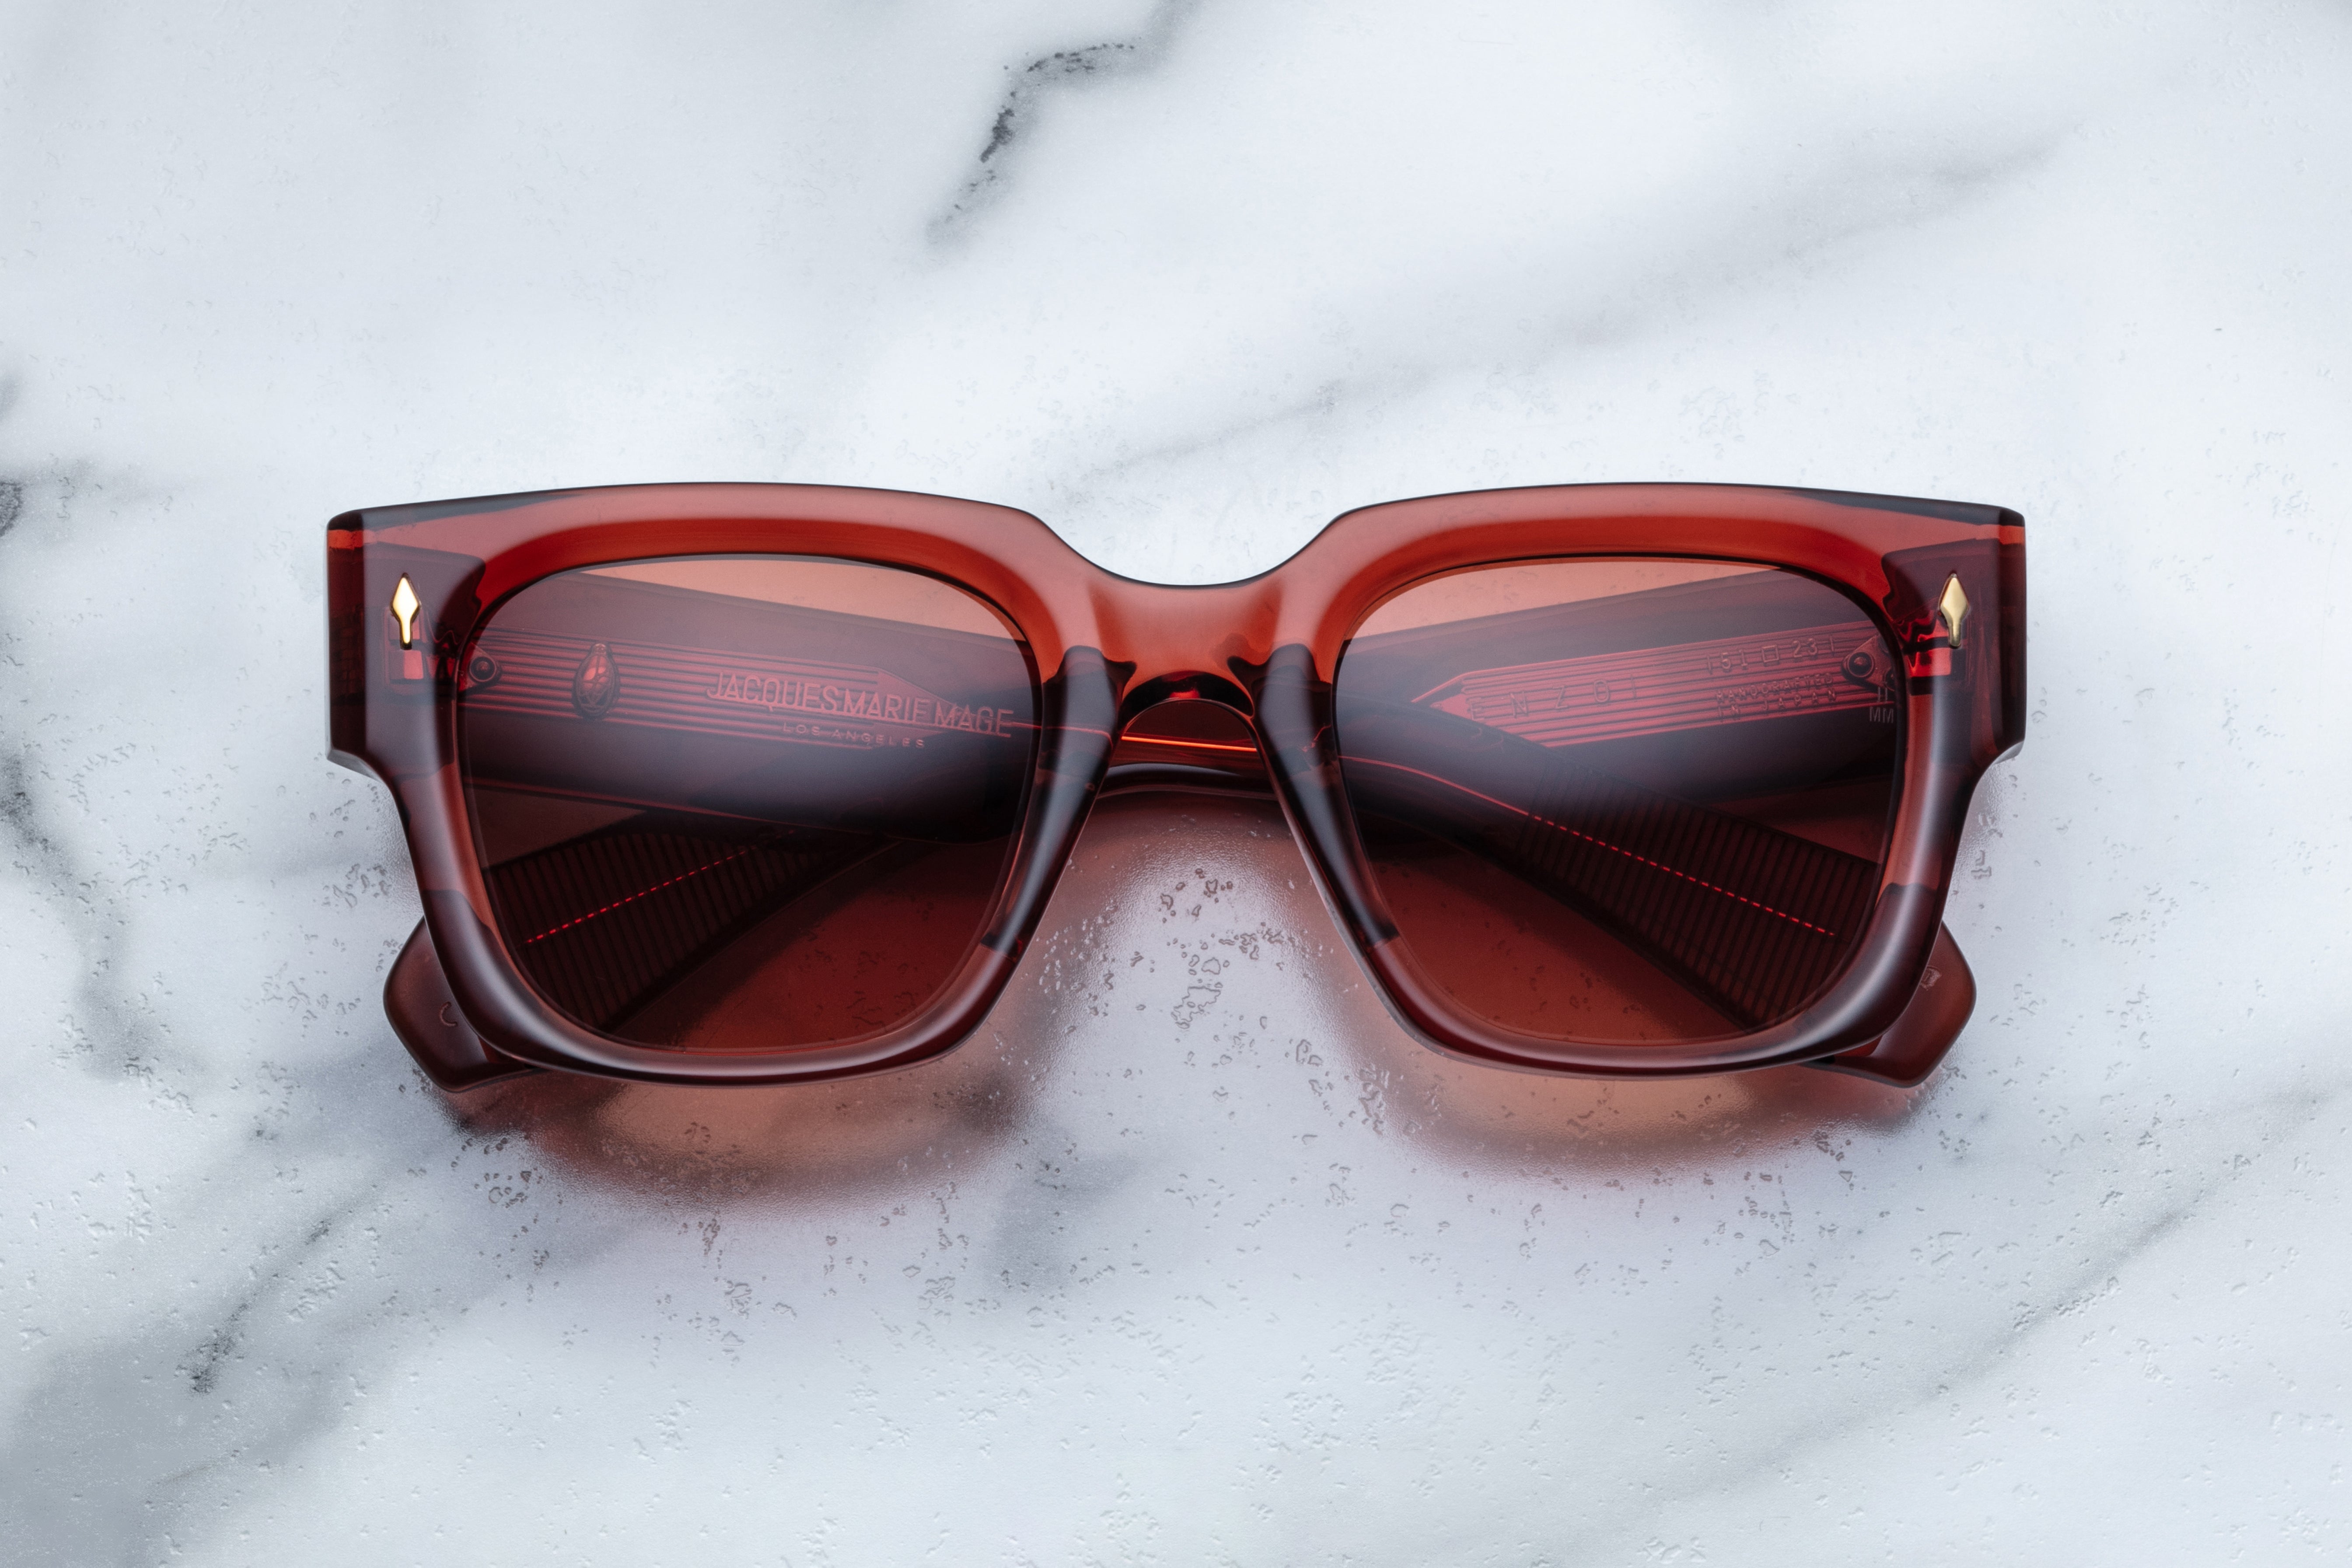 Jacques Marie Mage — Limited Edition Eyewear | Handcrafted